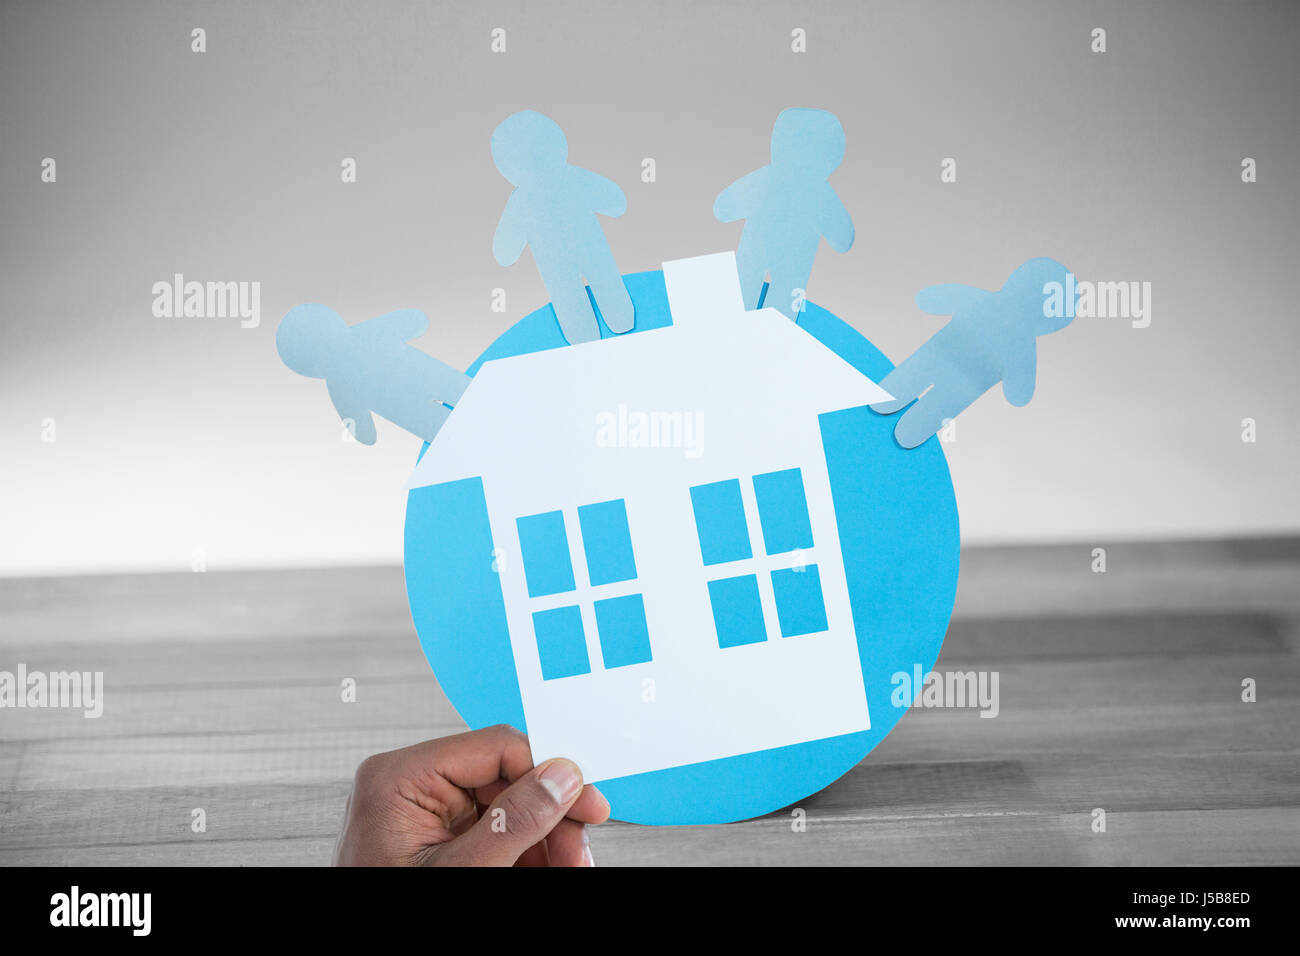 hand holding a house in paper against blue paper cut out figures on globe Stock Photo